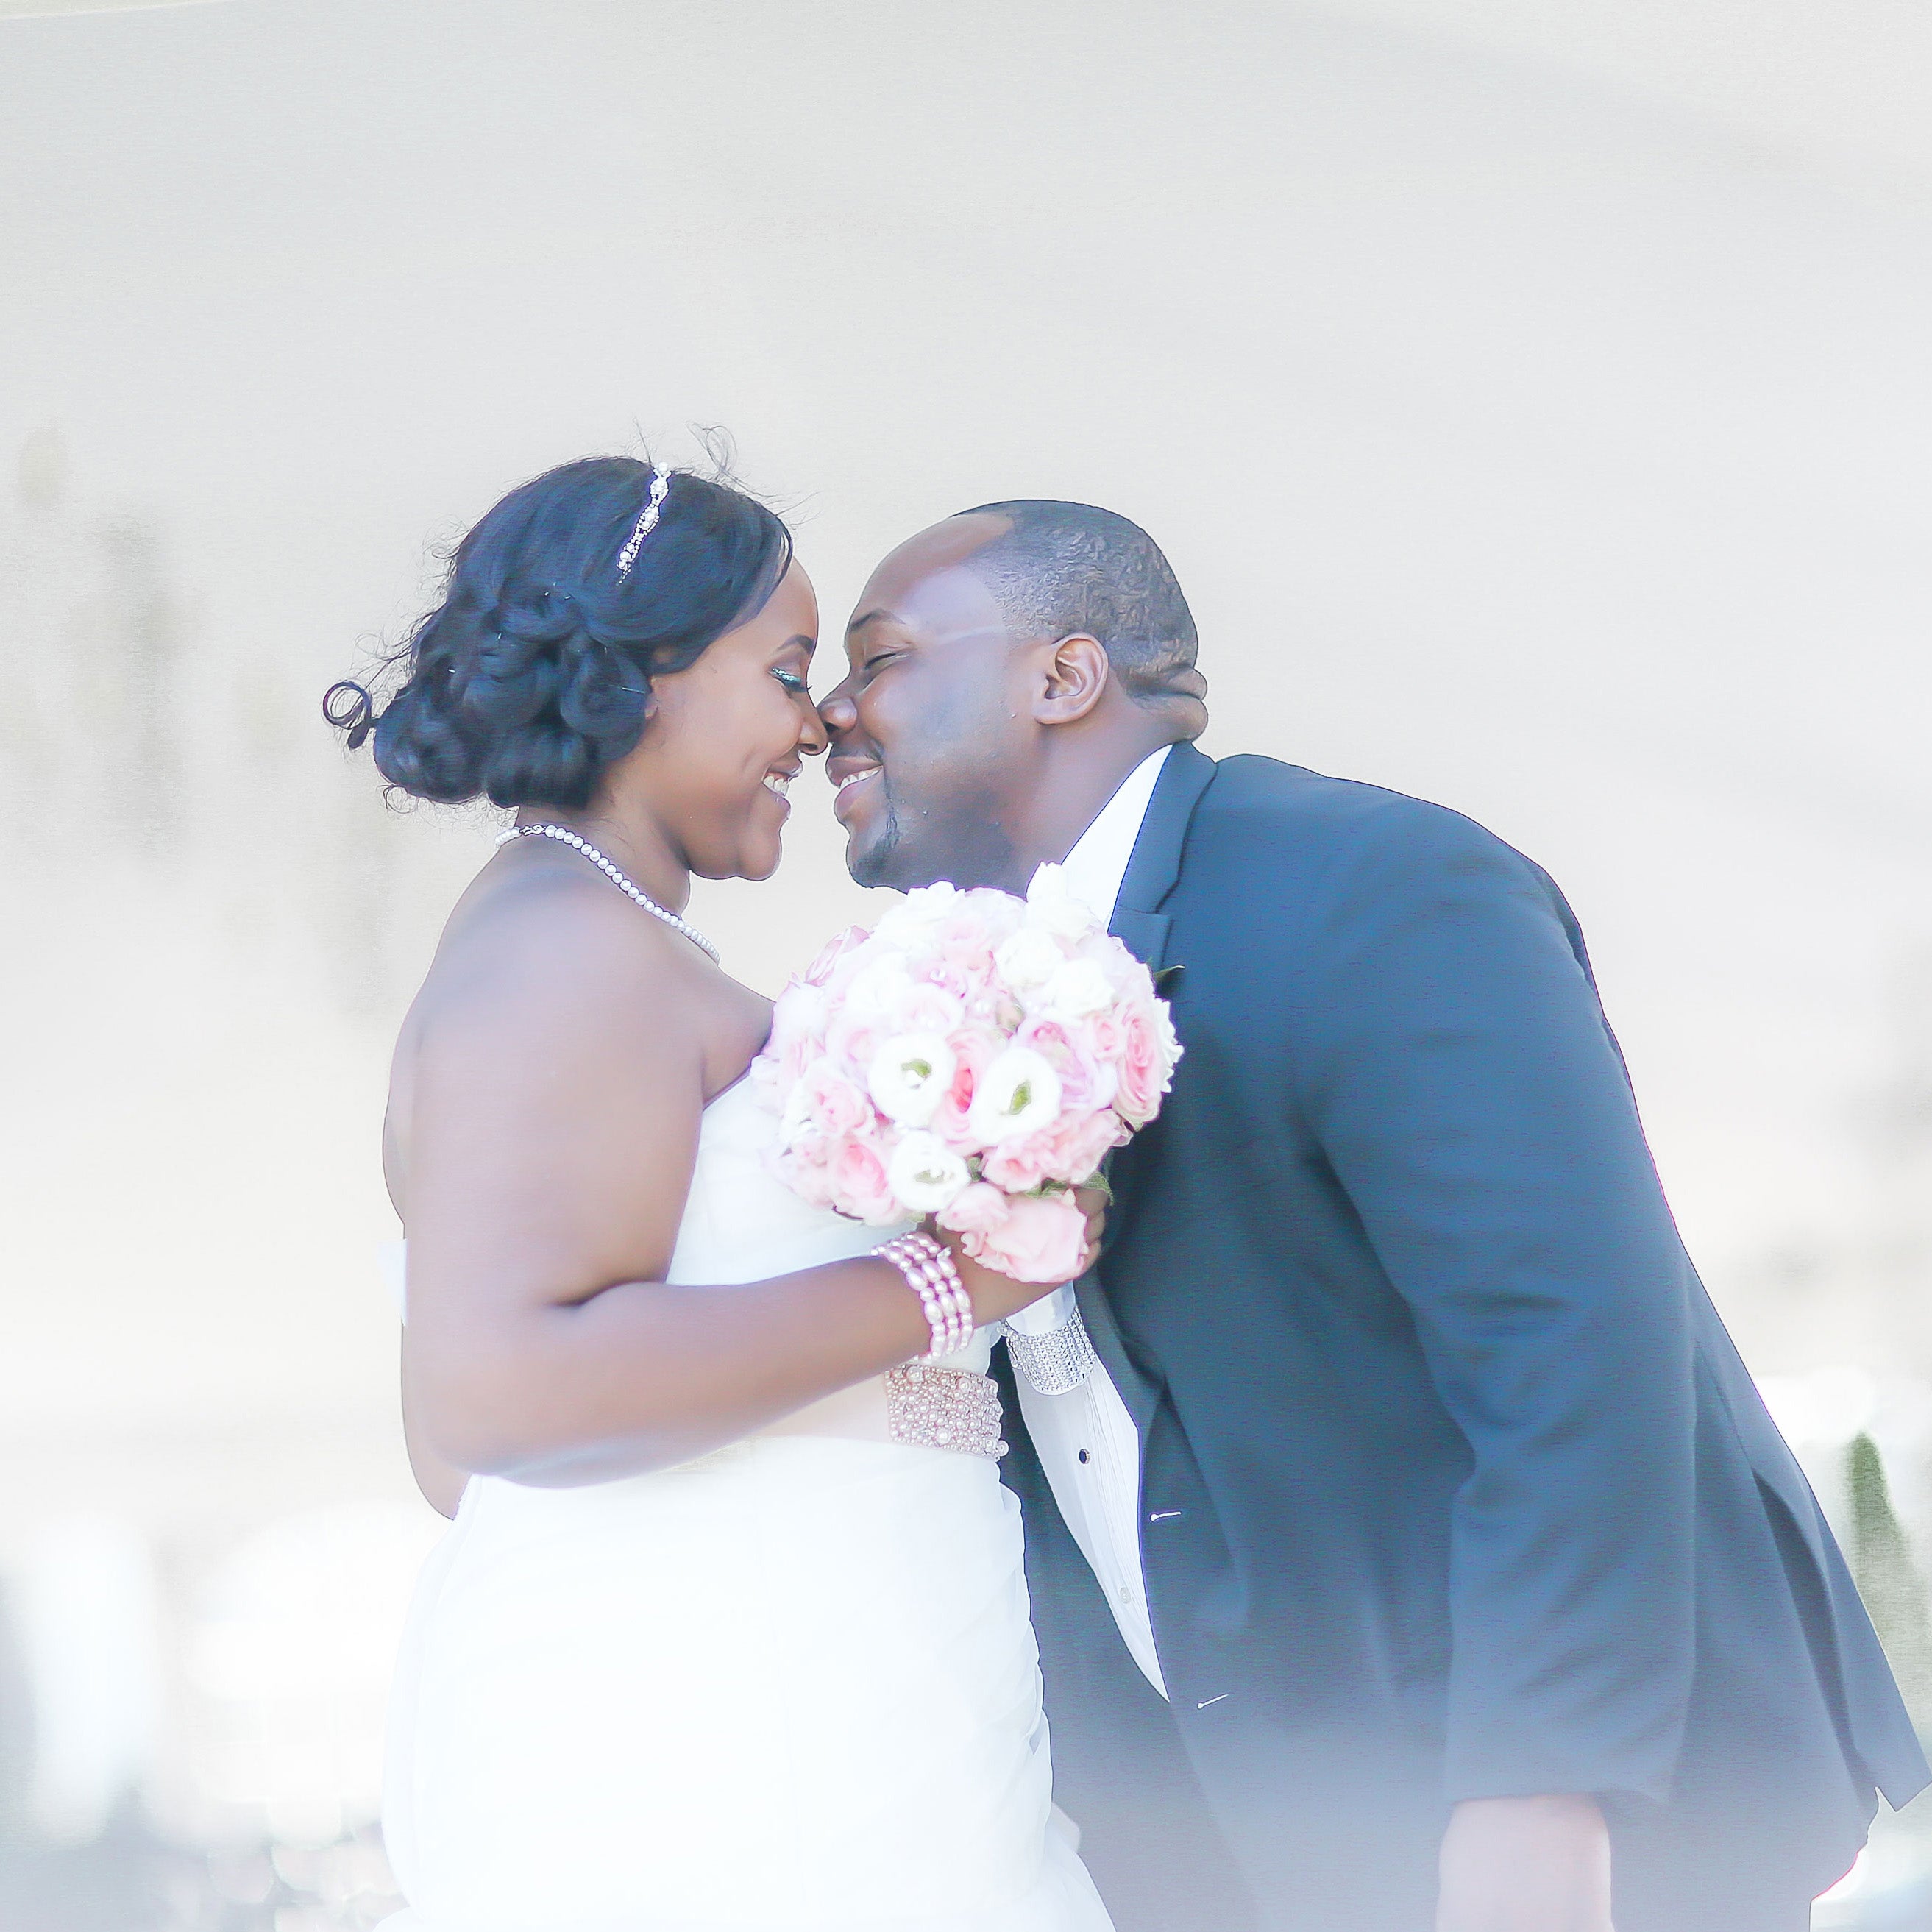 Bridal Bliss: Blaise and Nicole's Wedding Has Happily Ever After Written All Over It
